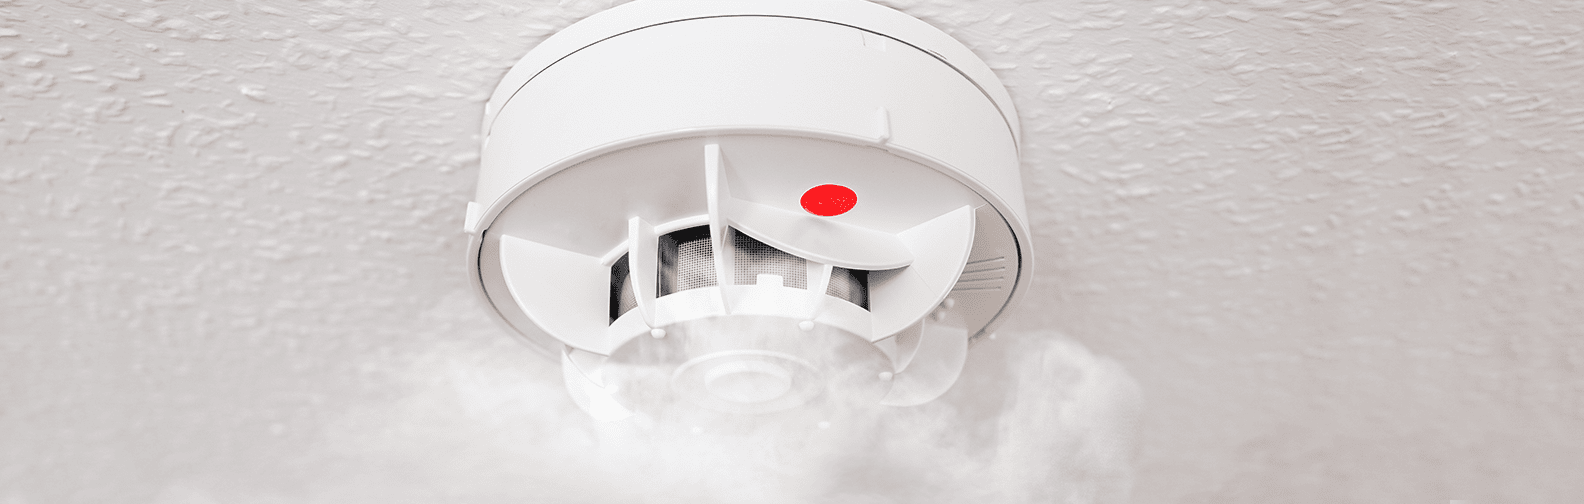 fire alarm safety hardwired firealarms